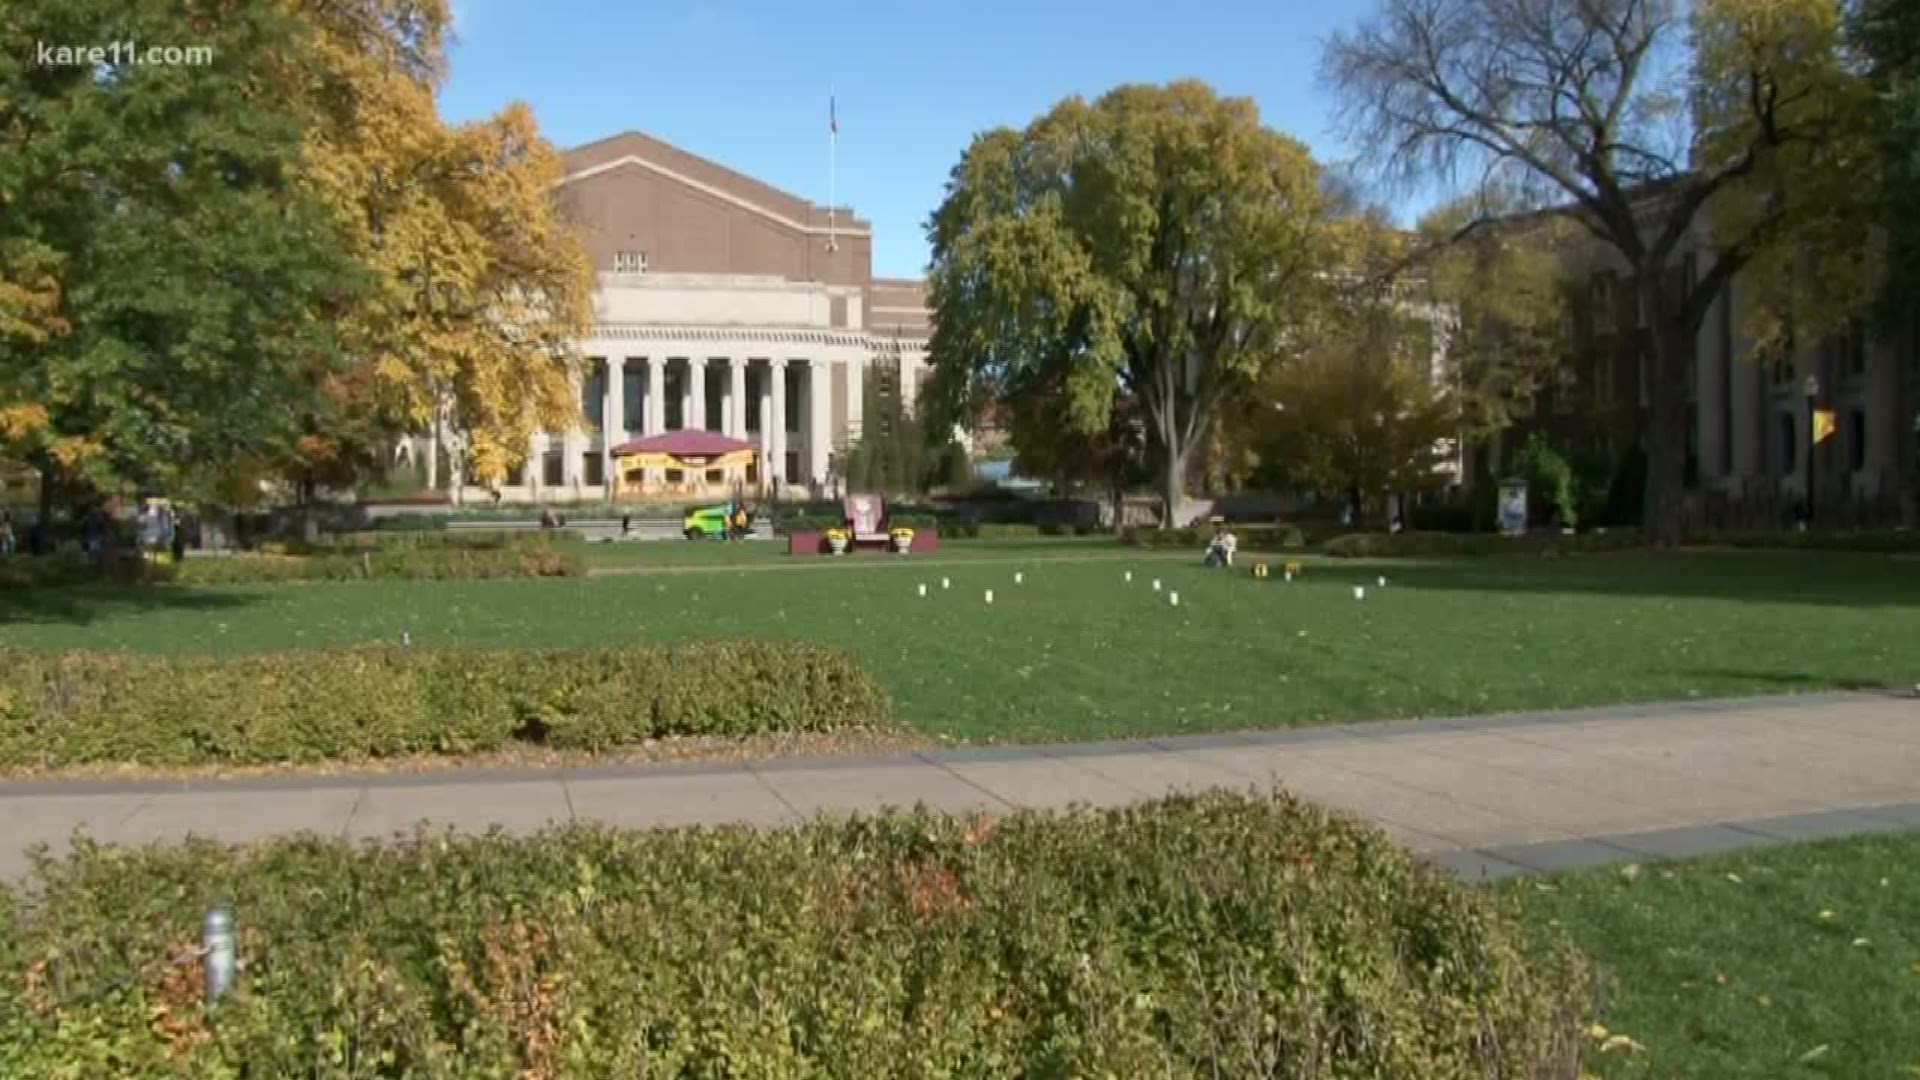 Students at the University of Minnesota want to make campus safer.